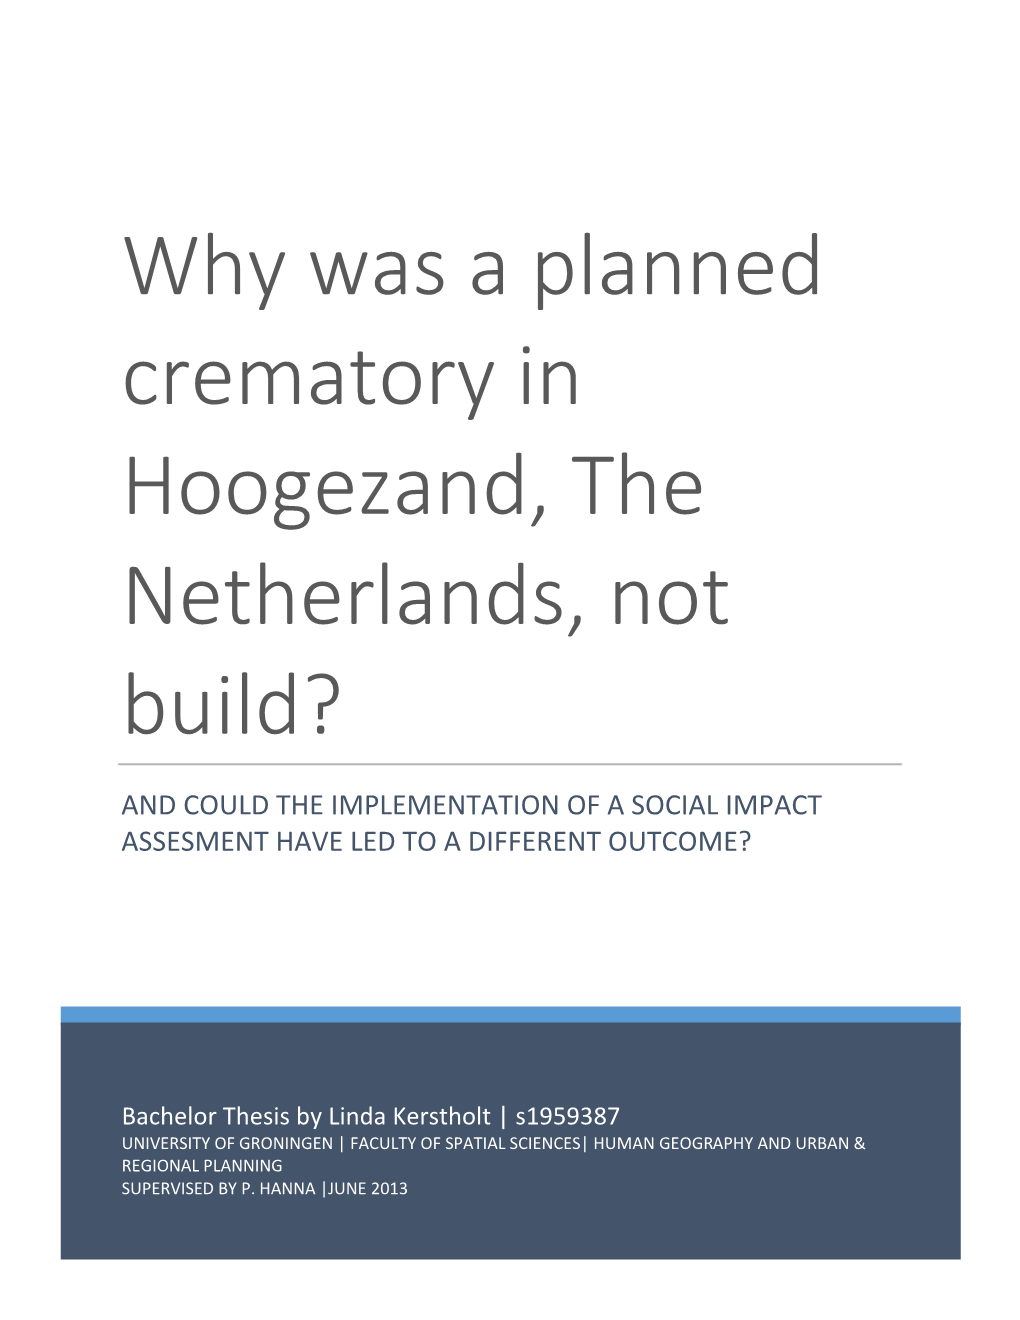 Why Was a Planned Crematory in Hoogezand, the Netherlands, Not Build?